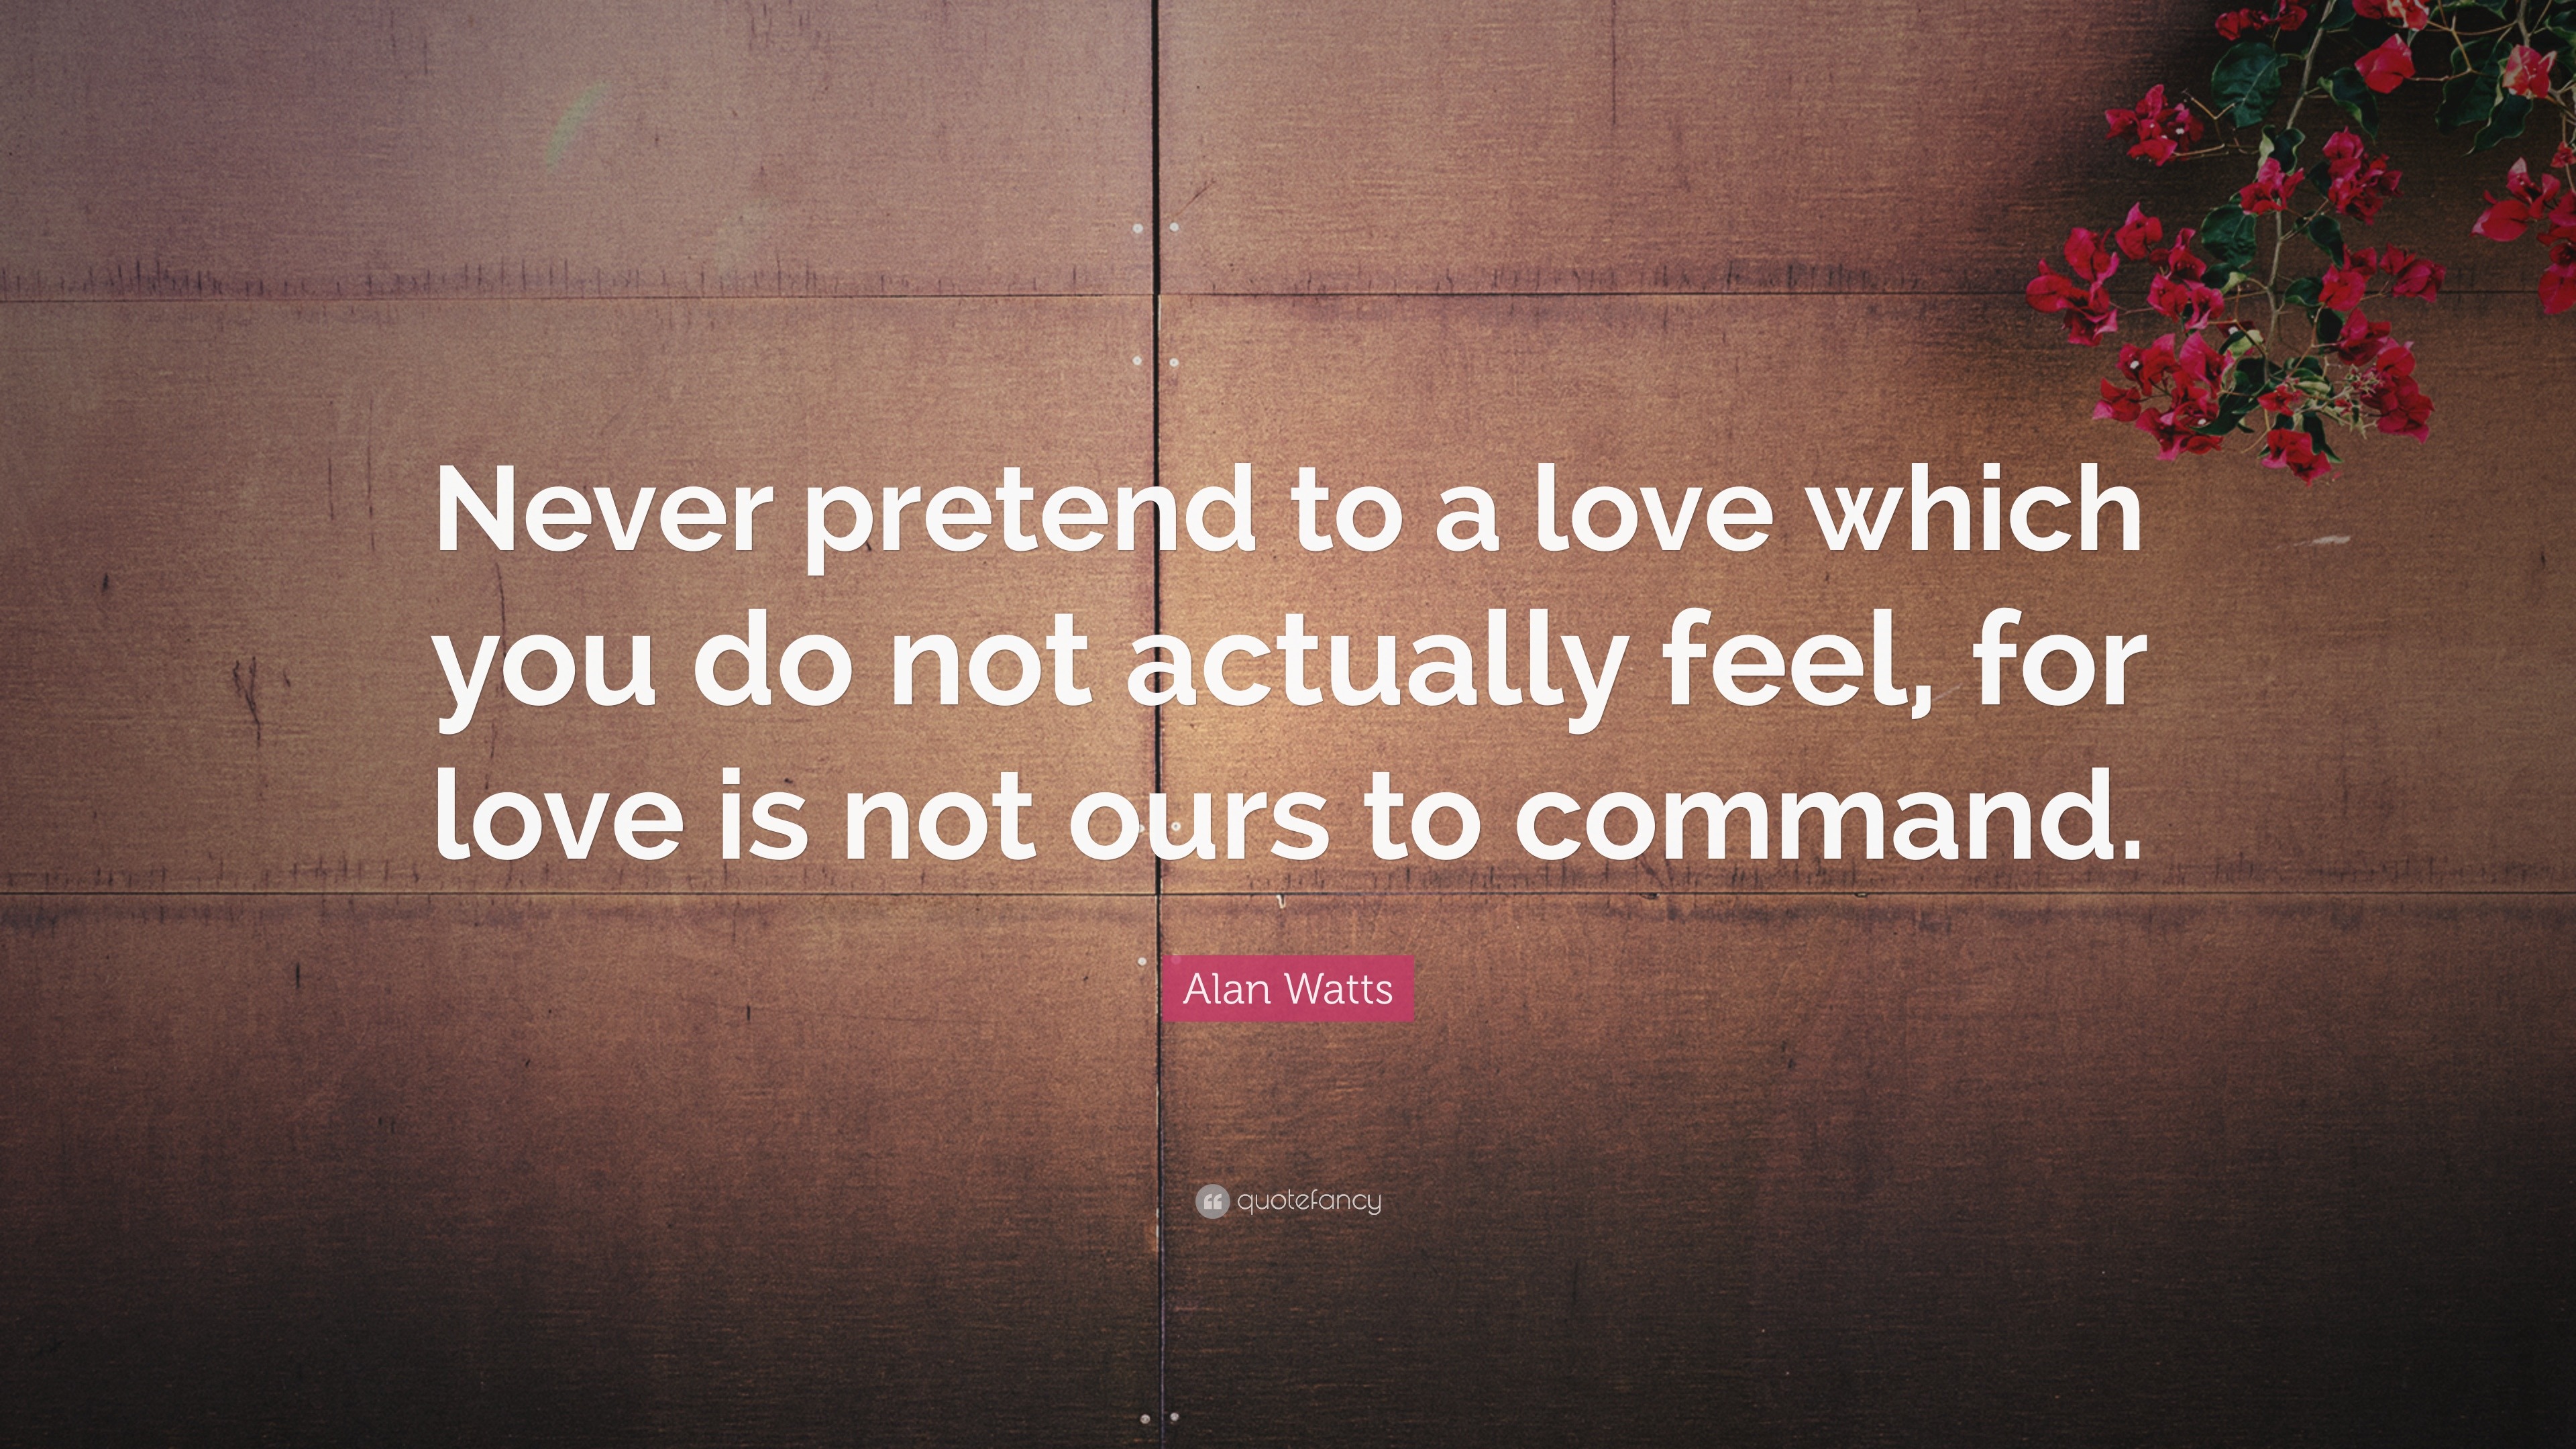 Alan Watts Quote: “Never pretend to a love which you do not actually